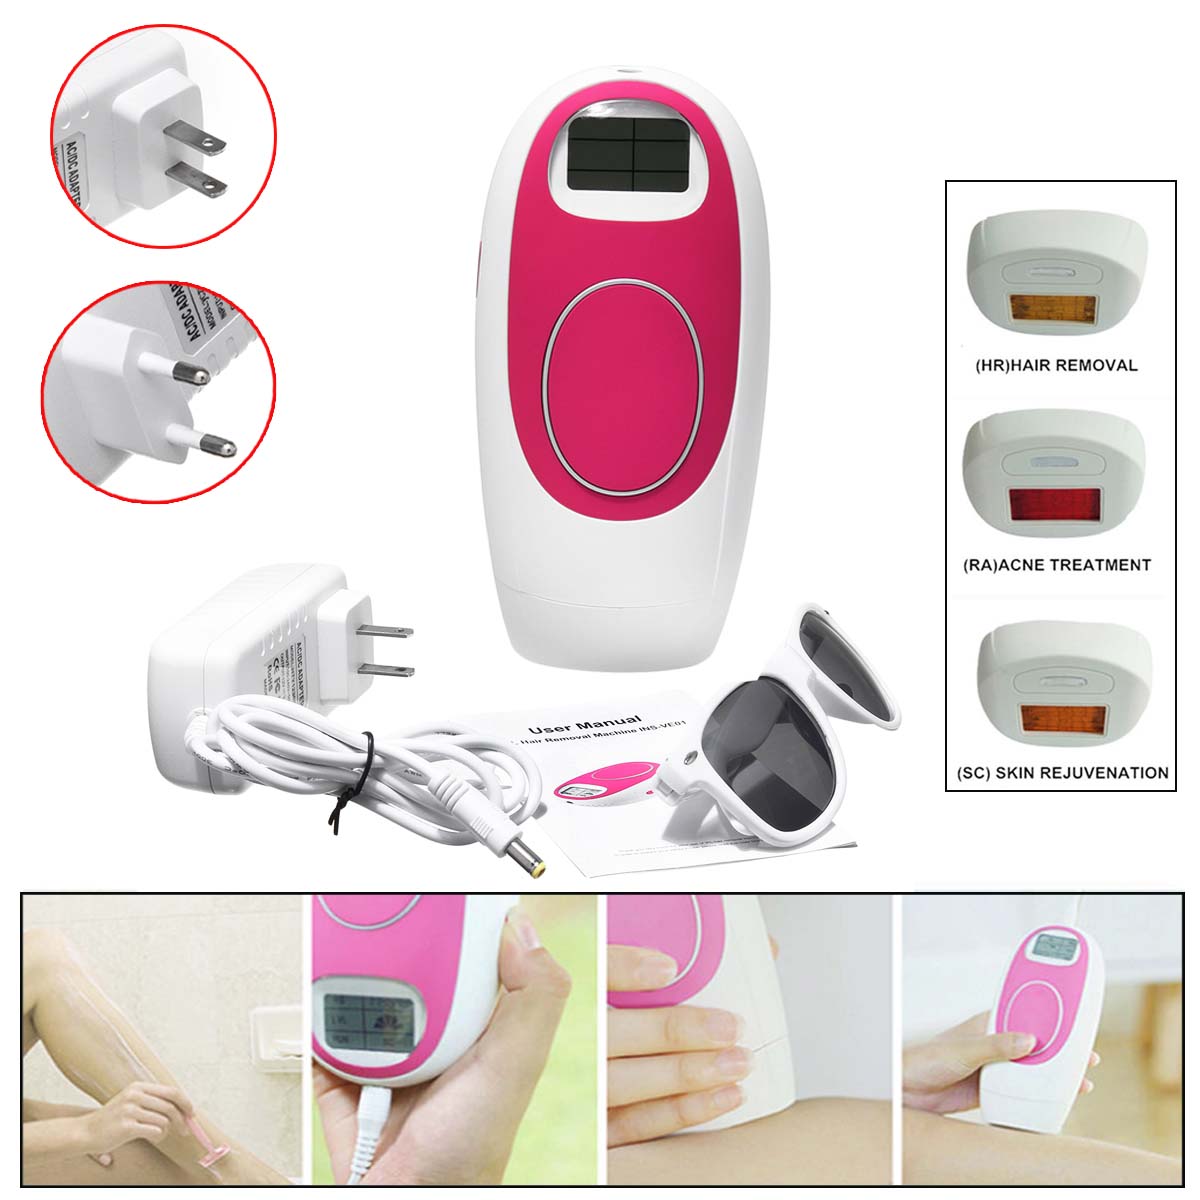 Replacement-Lamp-For-Laser-IPL-Permanent-Hair-Removal-Machine-For-Face-and-Body-1234232-3